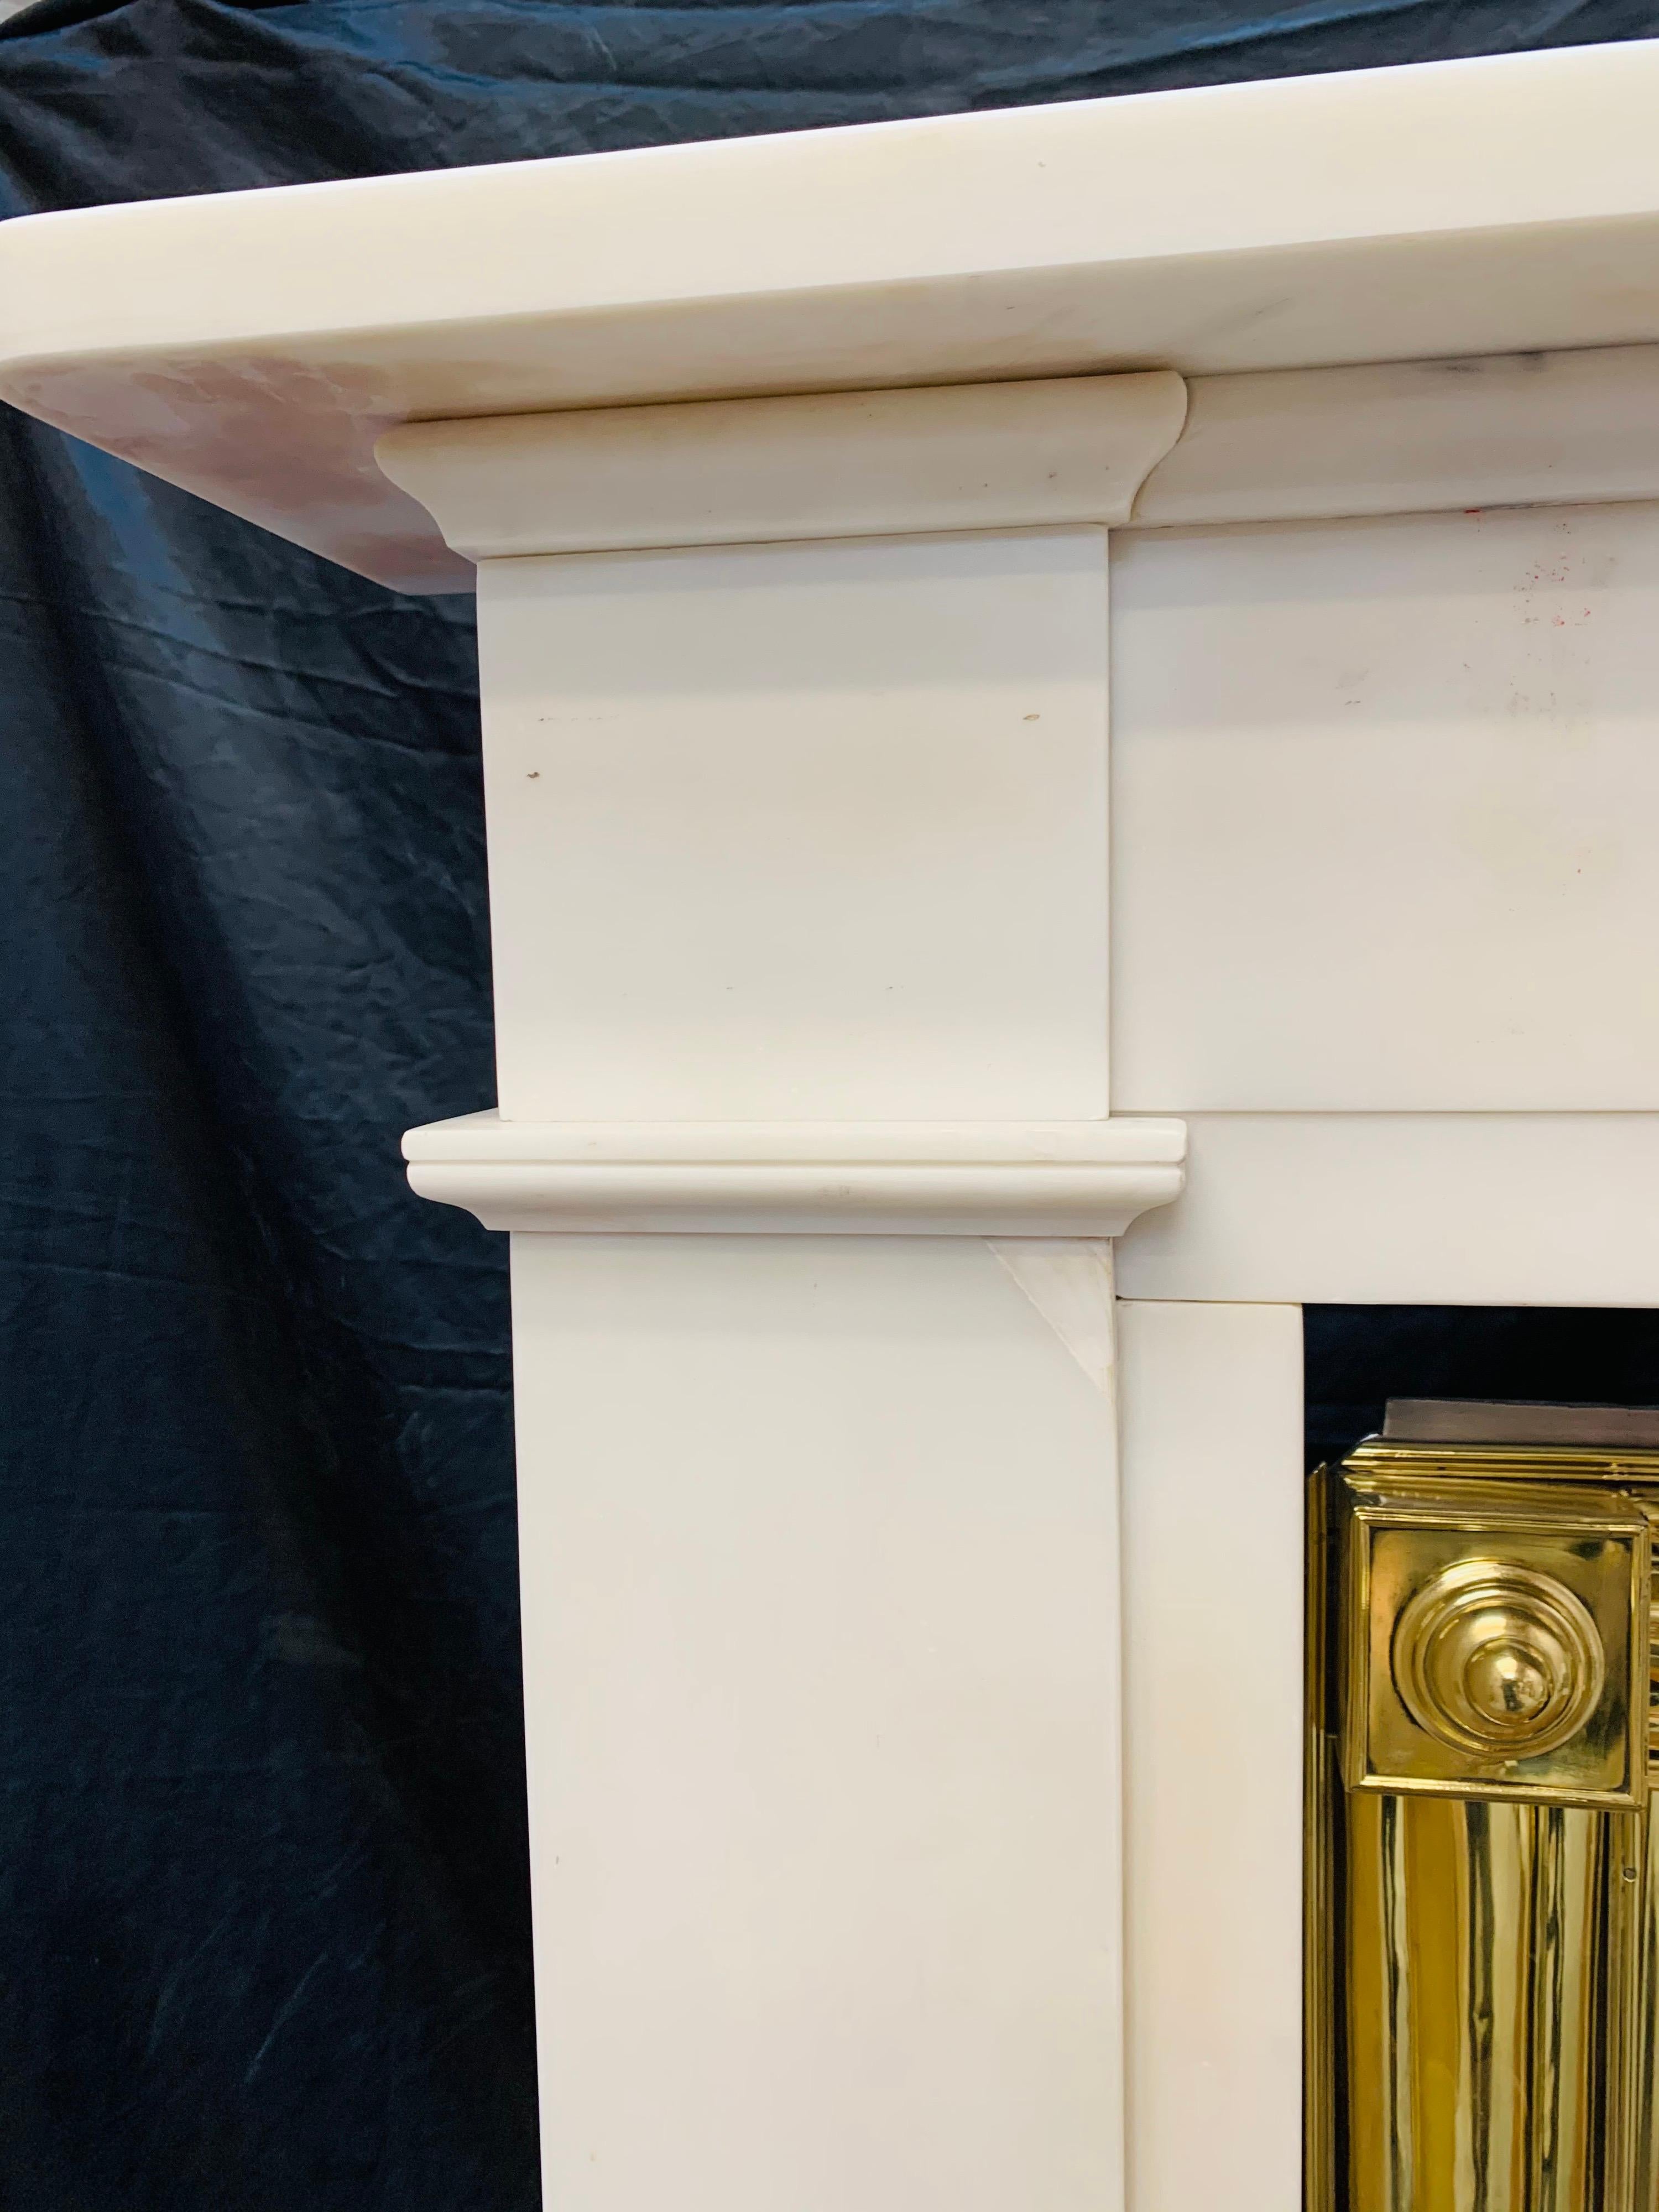 A large, rare and elegant early 19th century 1810c Scottish (Edinburgh’s New Town) Georgian Statuary marble fireplace surround. A generous square edged top shelf sits above a stepped unadorned frieze panel, flanked by protruding capitol’s with base